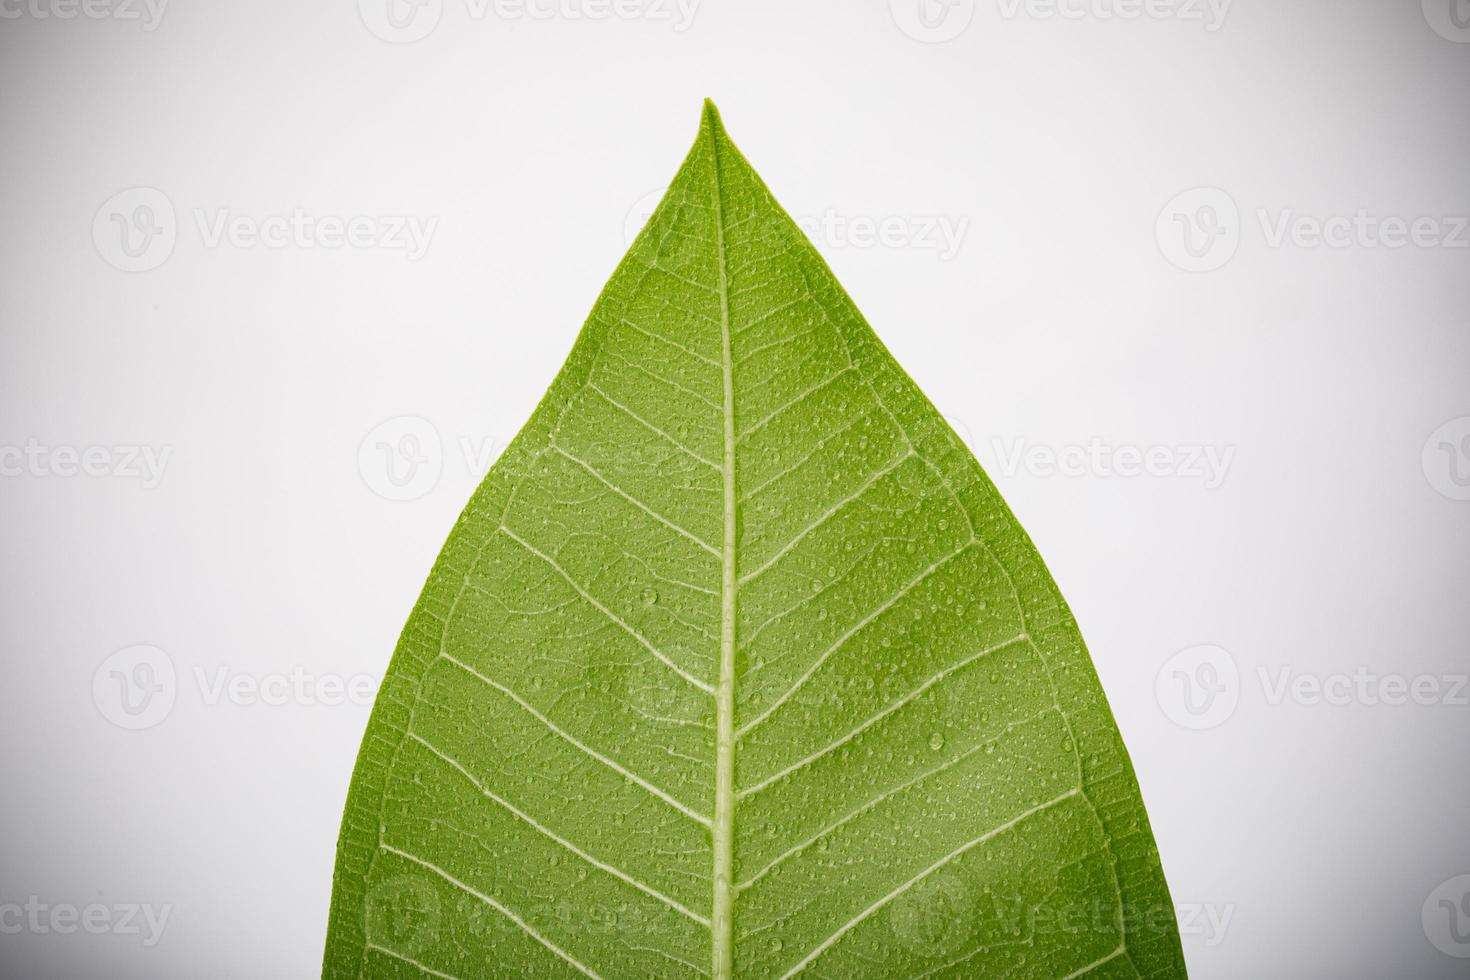 Skeletons and Texture of green leaf with water drop for background macro shot isolate on white background photo